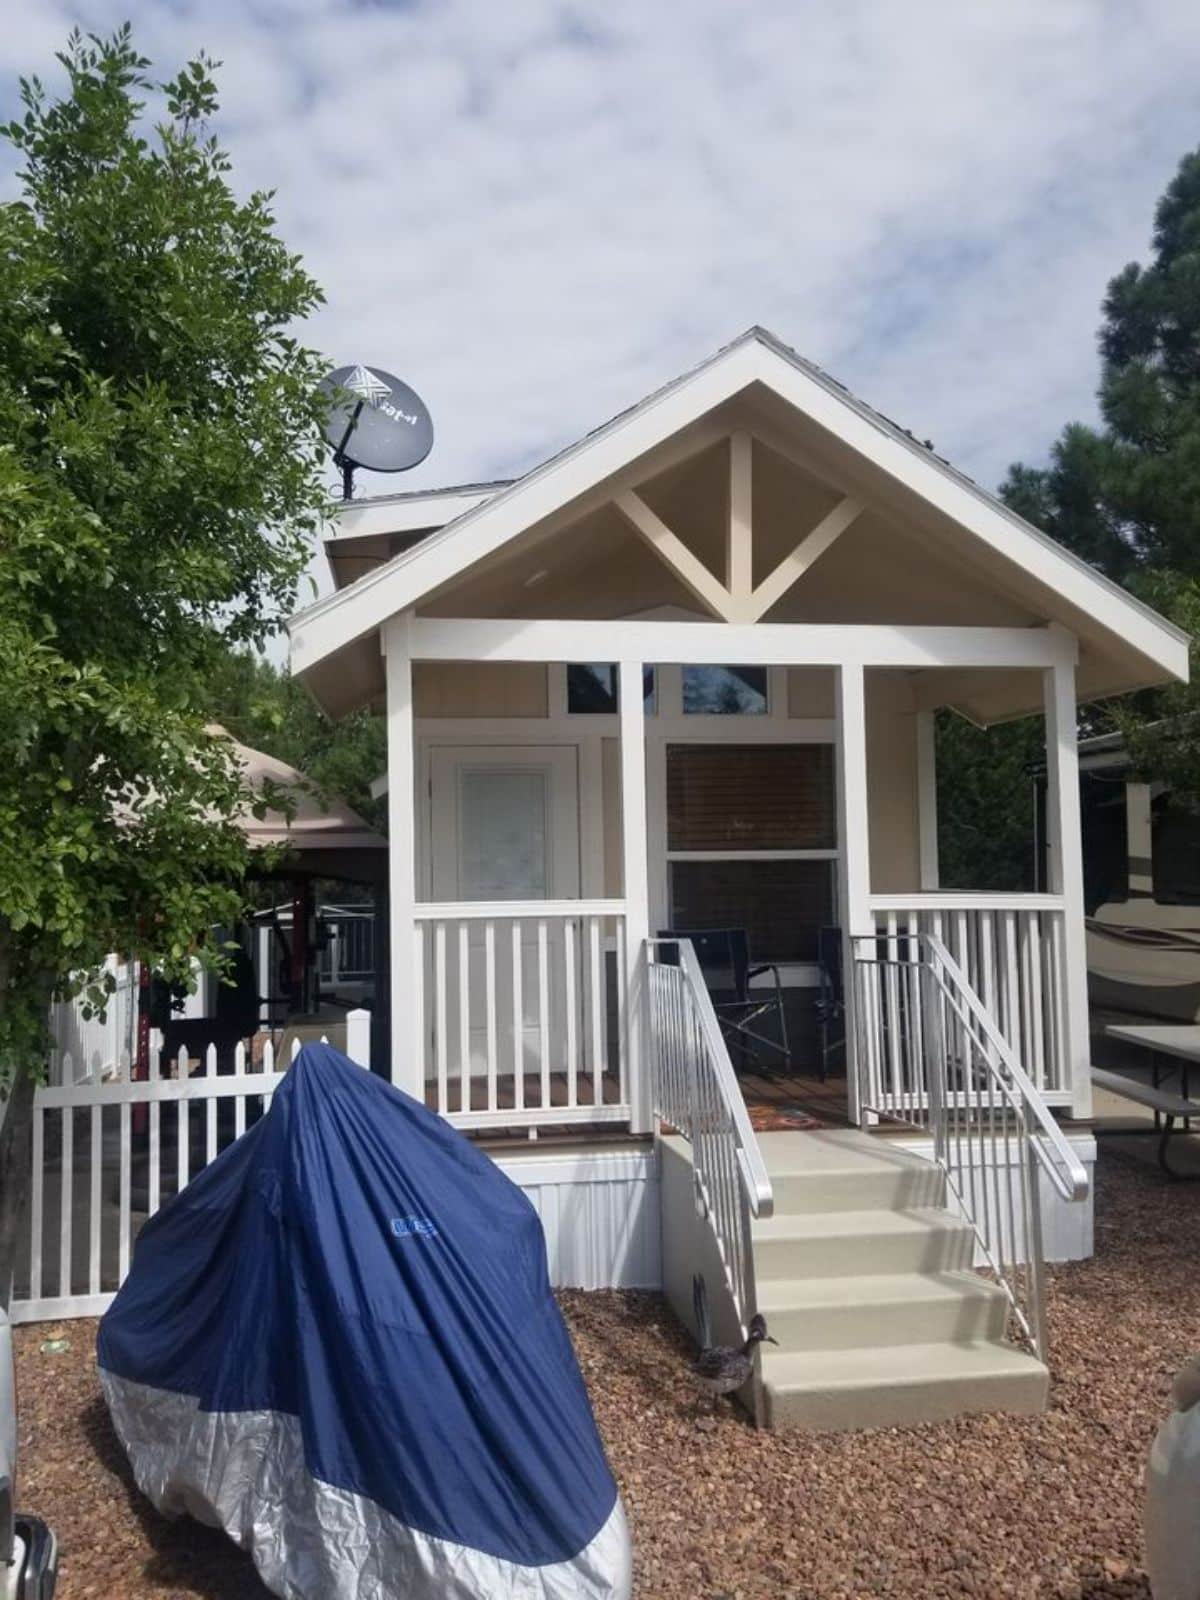 Main entrance view of Spacious Tiny House